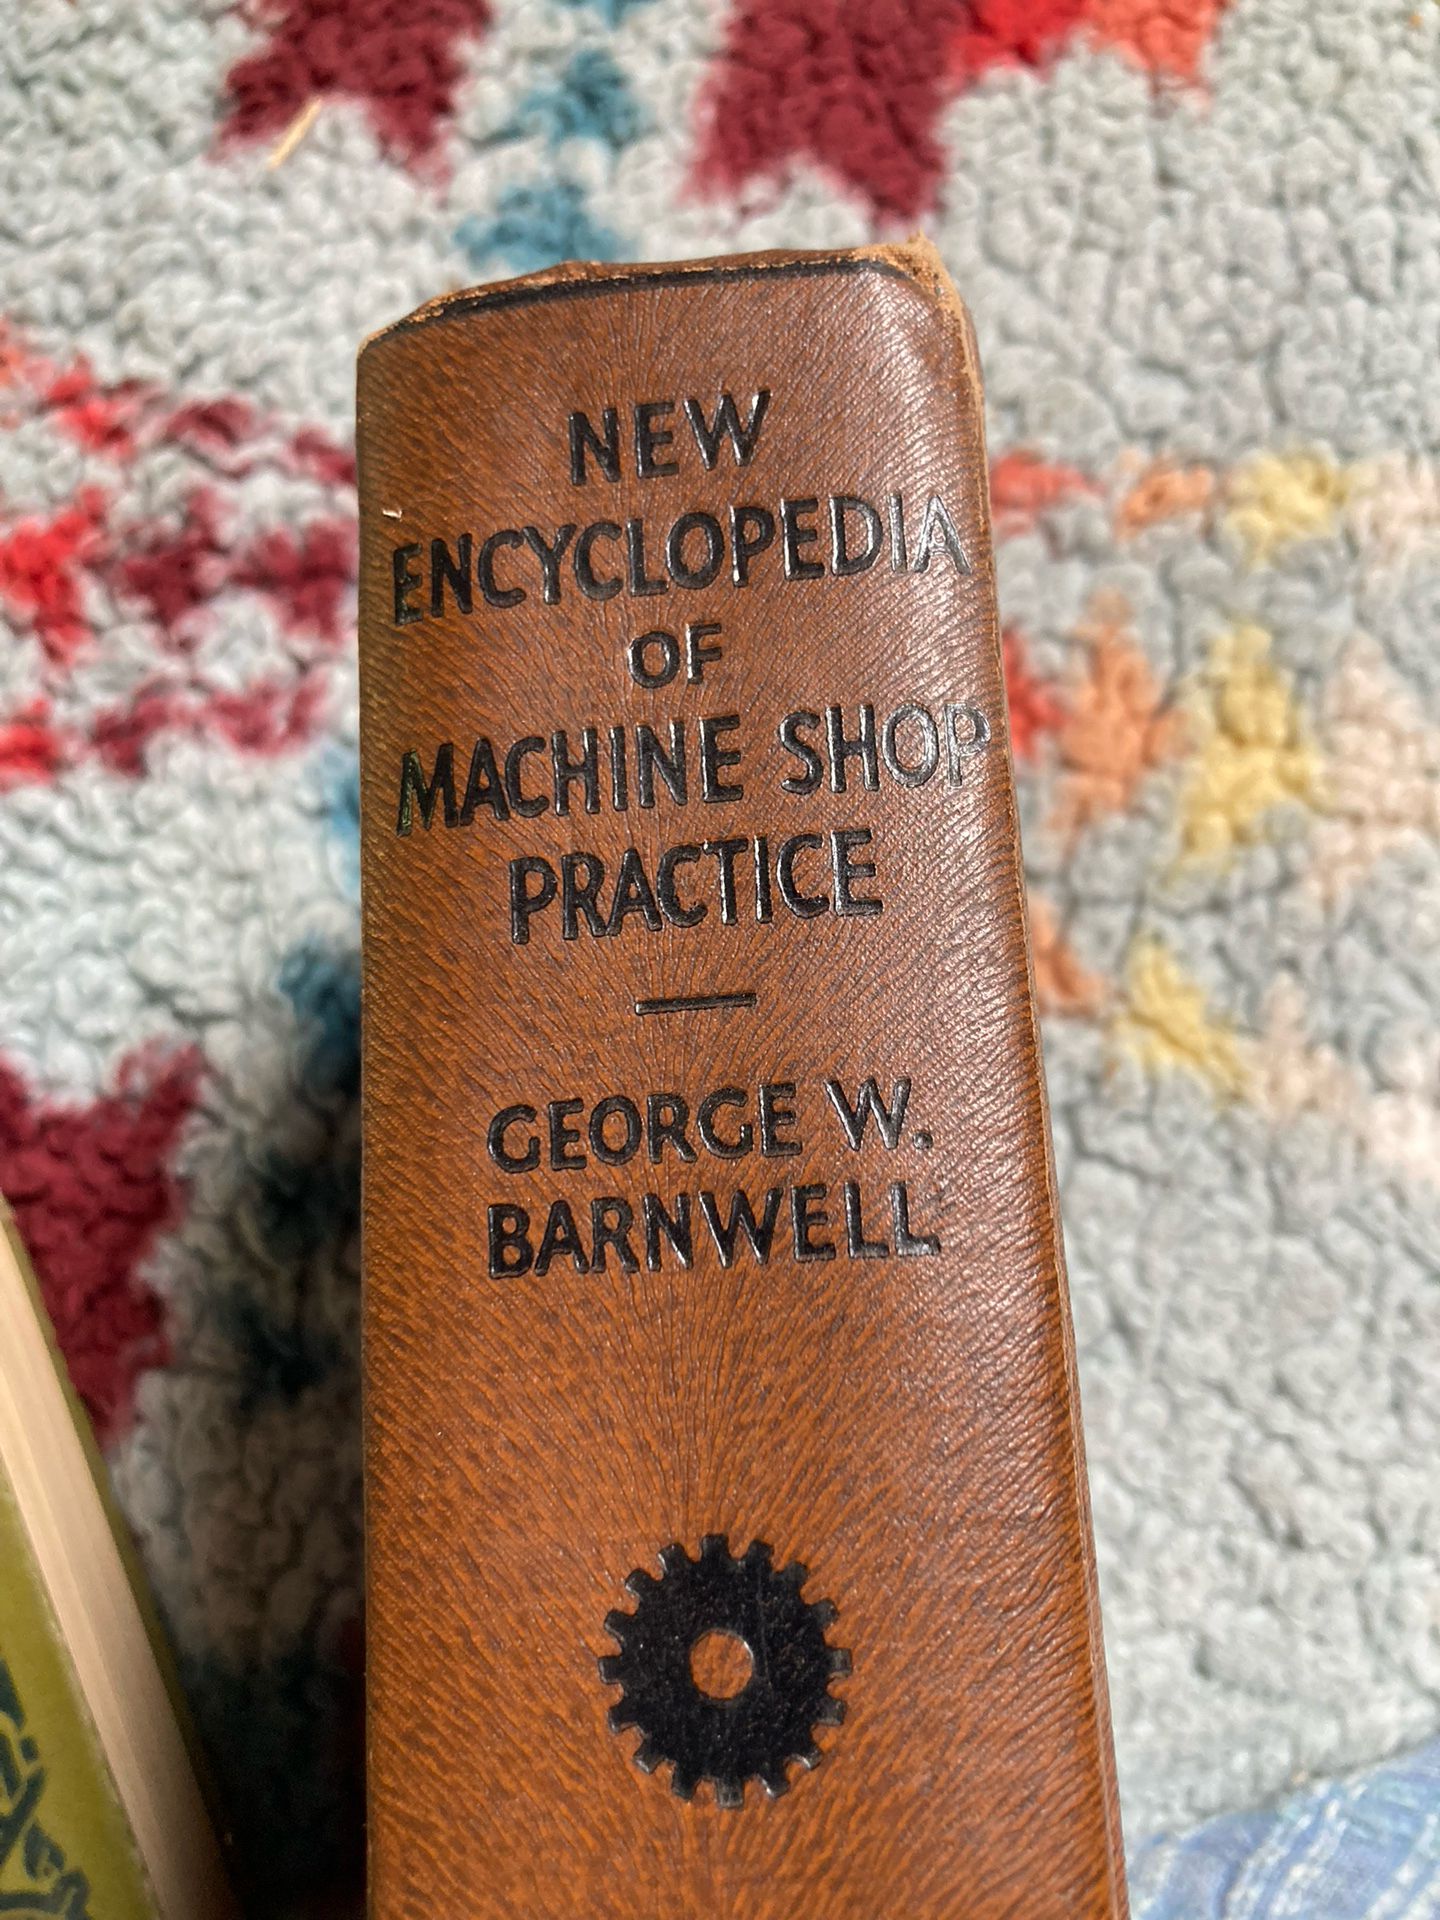 New Encyclopedia Of Machine Shop Practices-1941 Edition